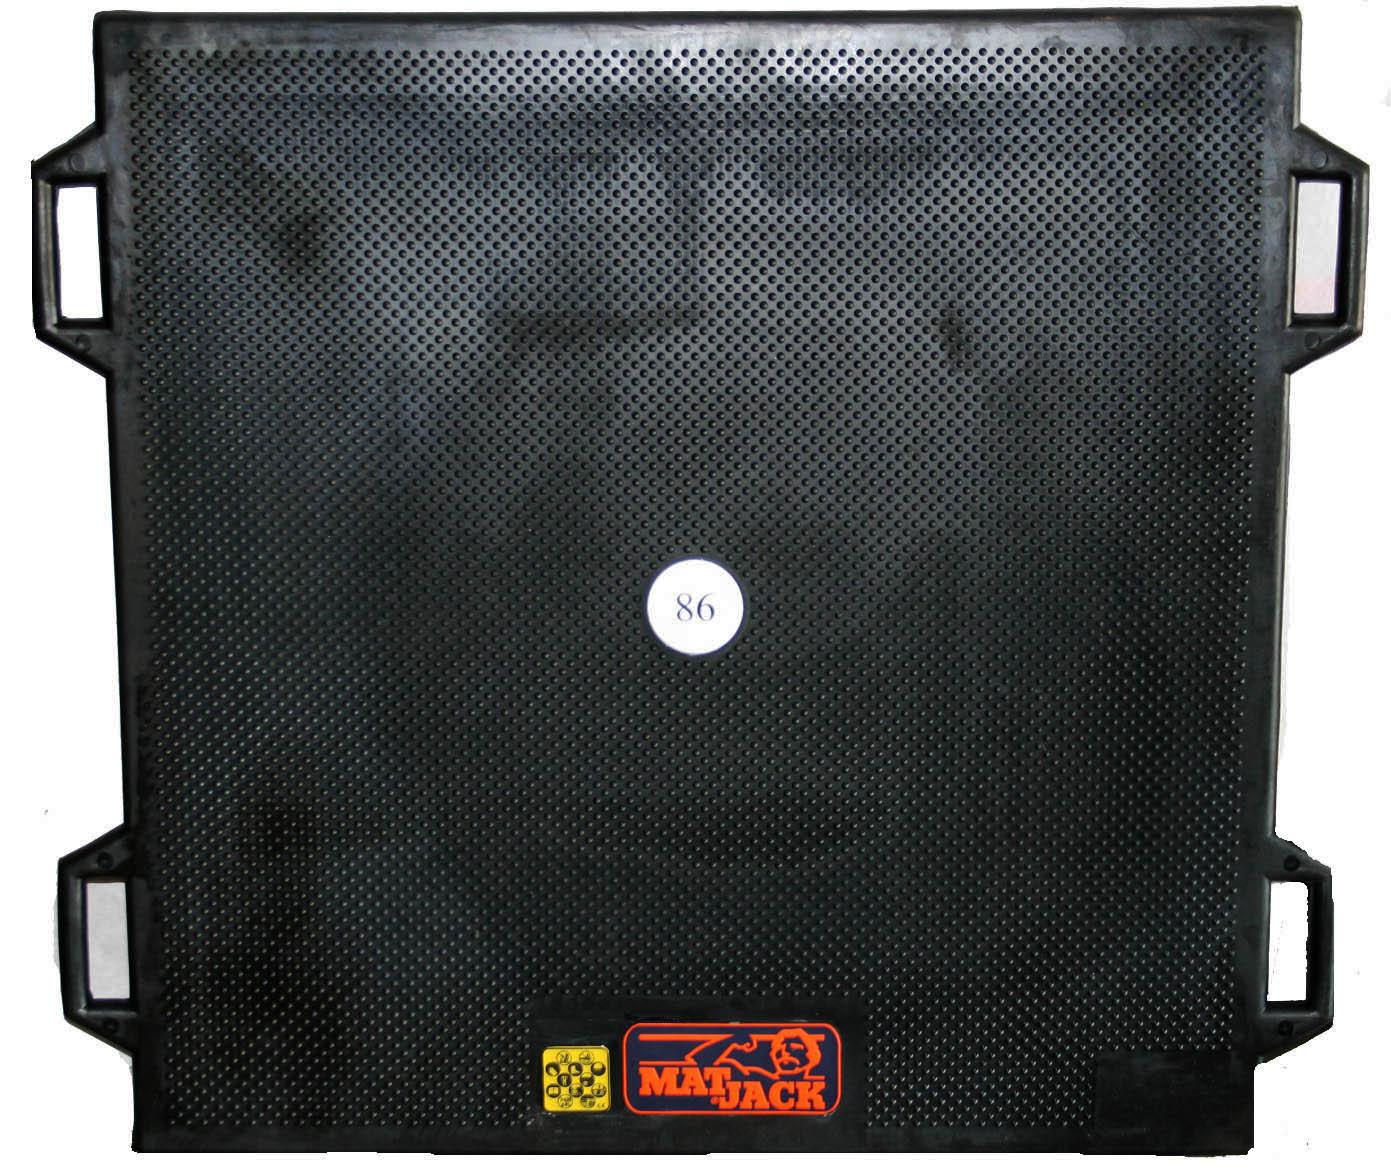 Load Rated Lifting bag RBLB 450-50 Double Fabric Base